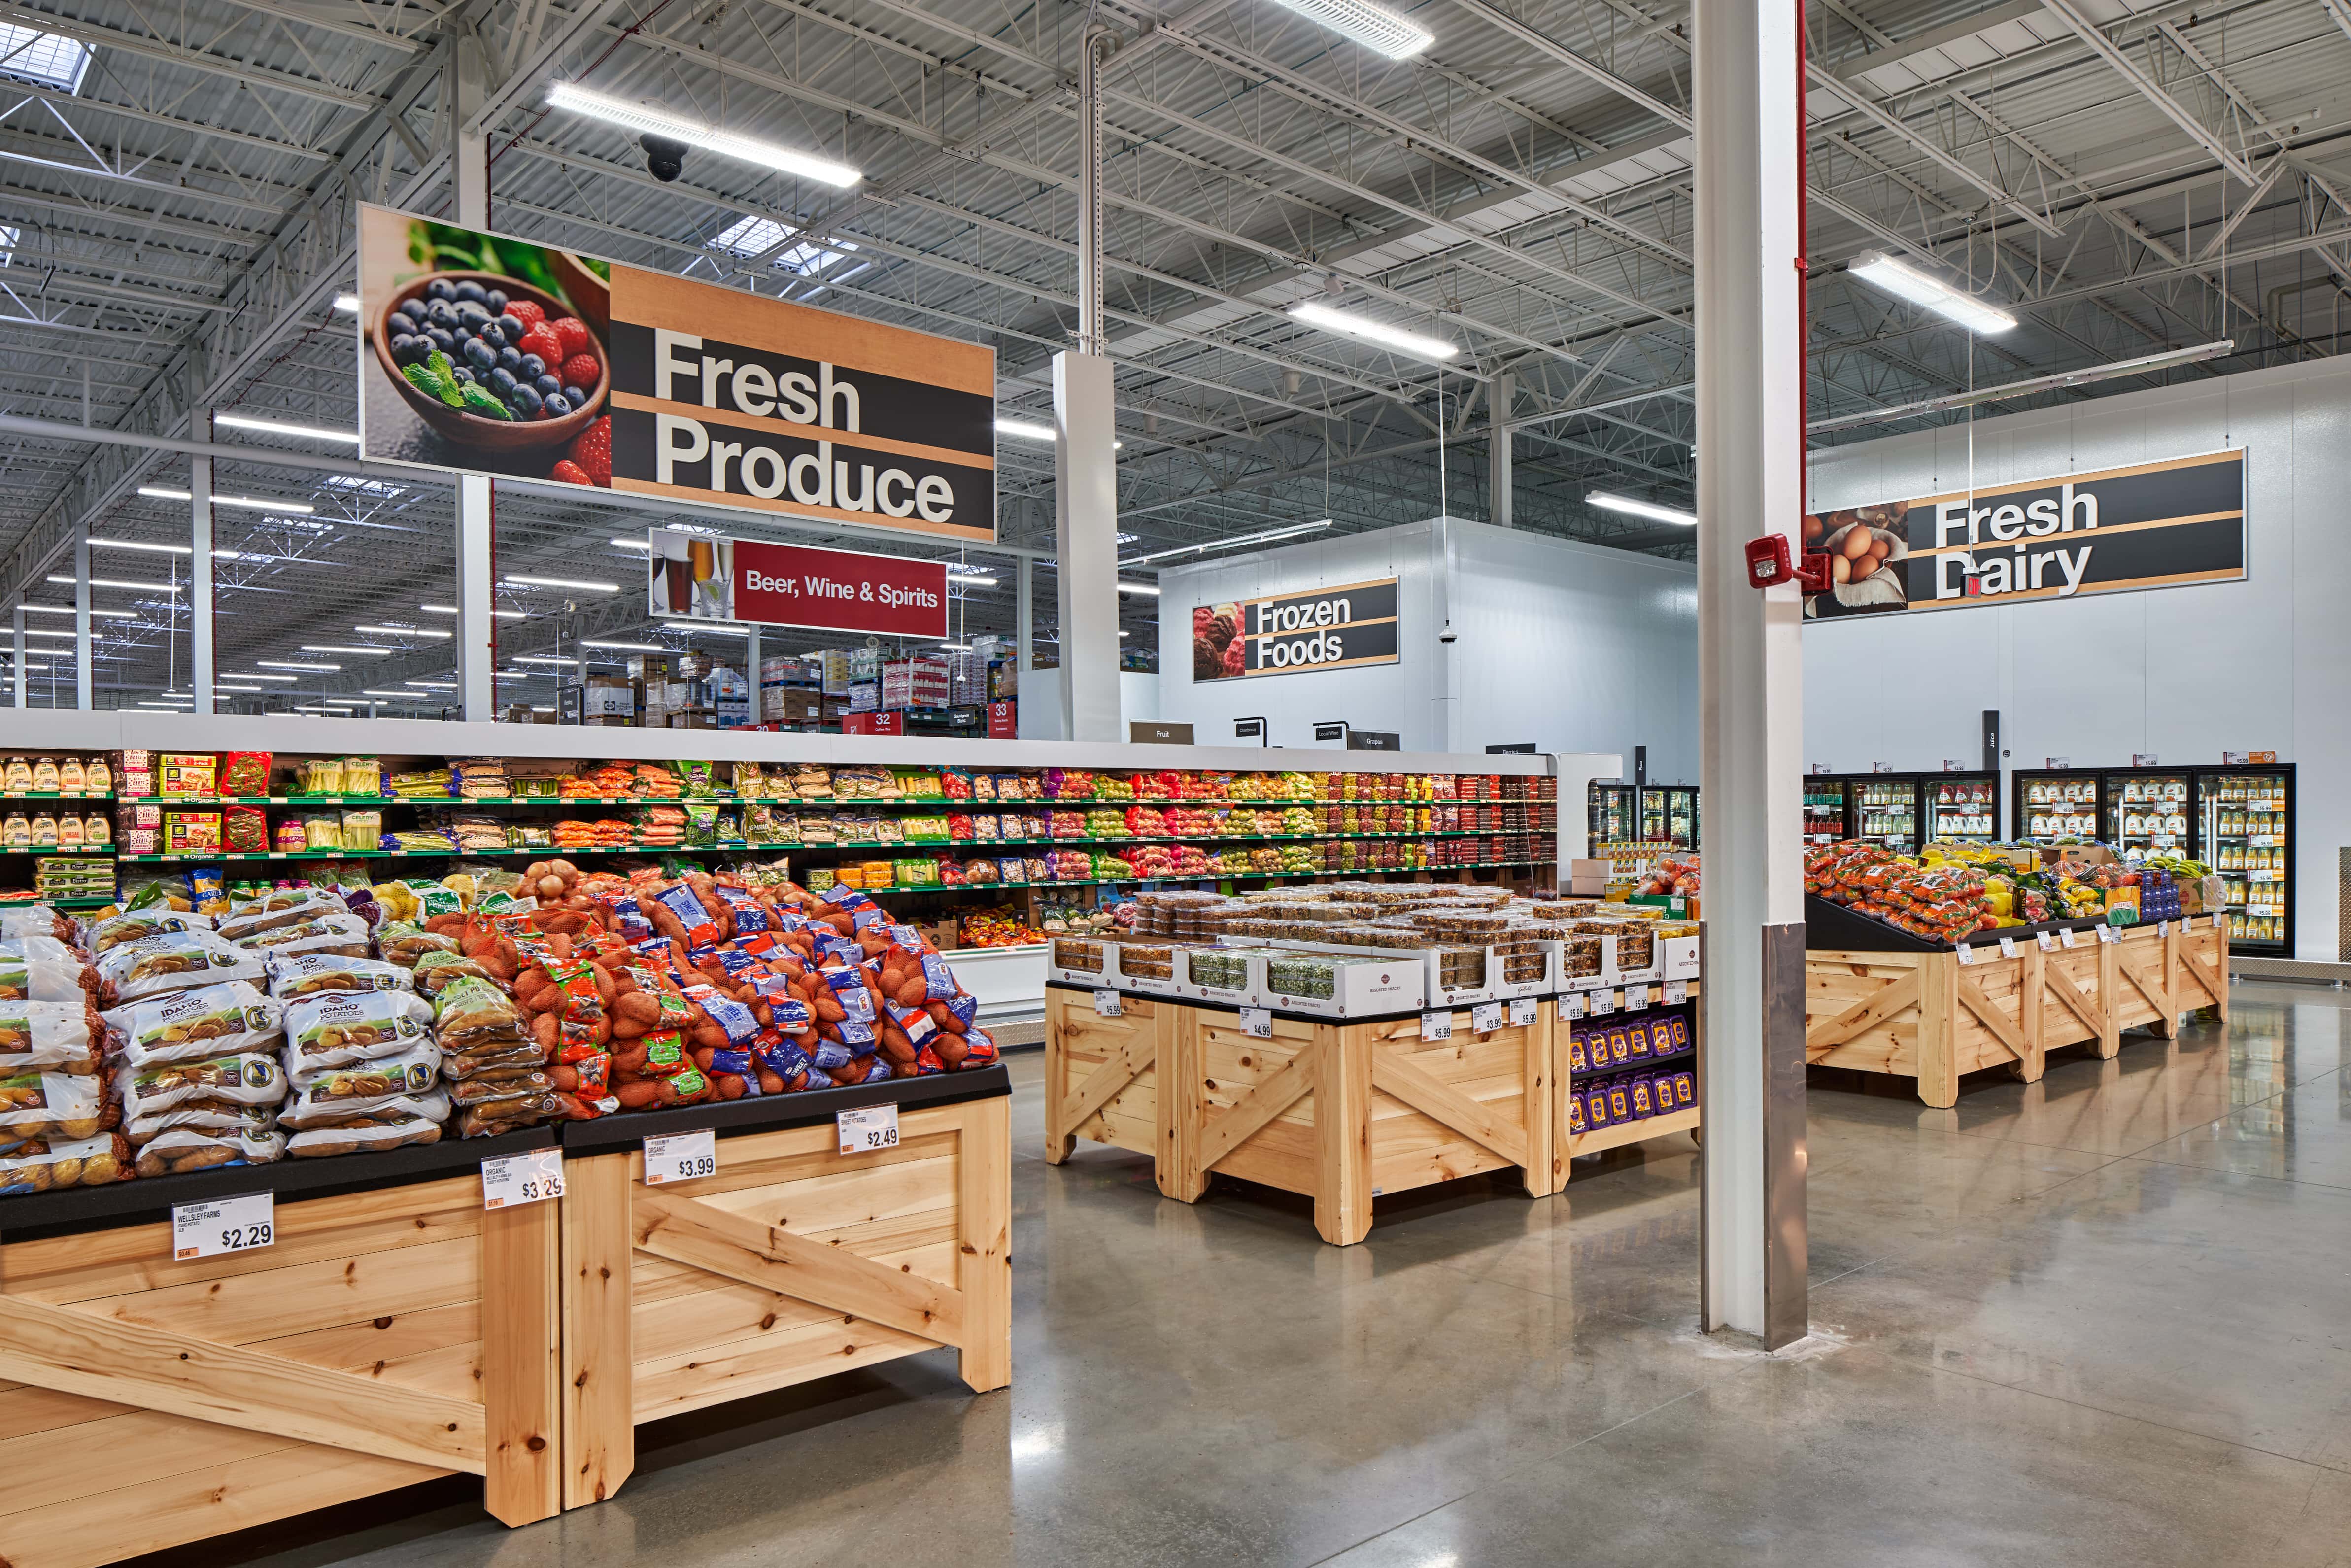 KIRCO MANIX Completes Construction of BJ's Wholesale Clubs